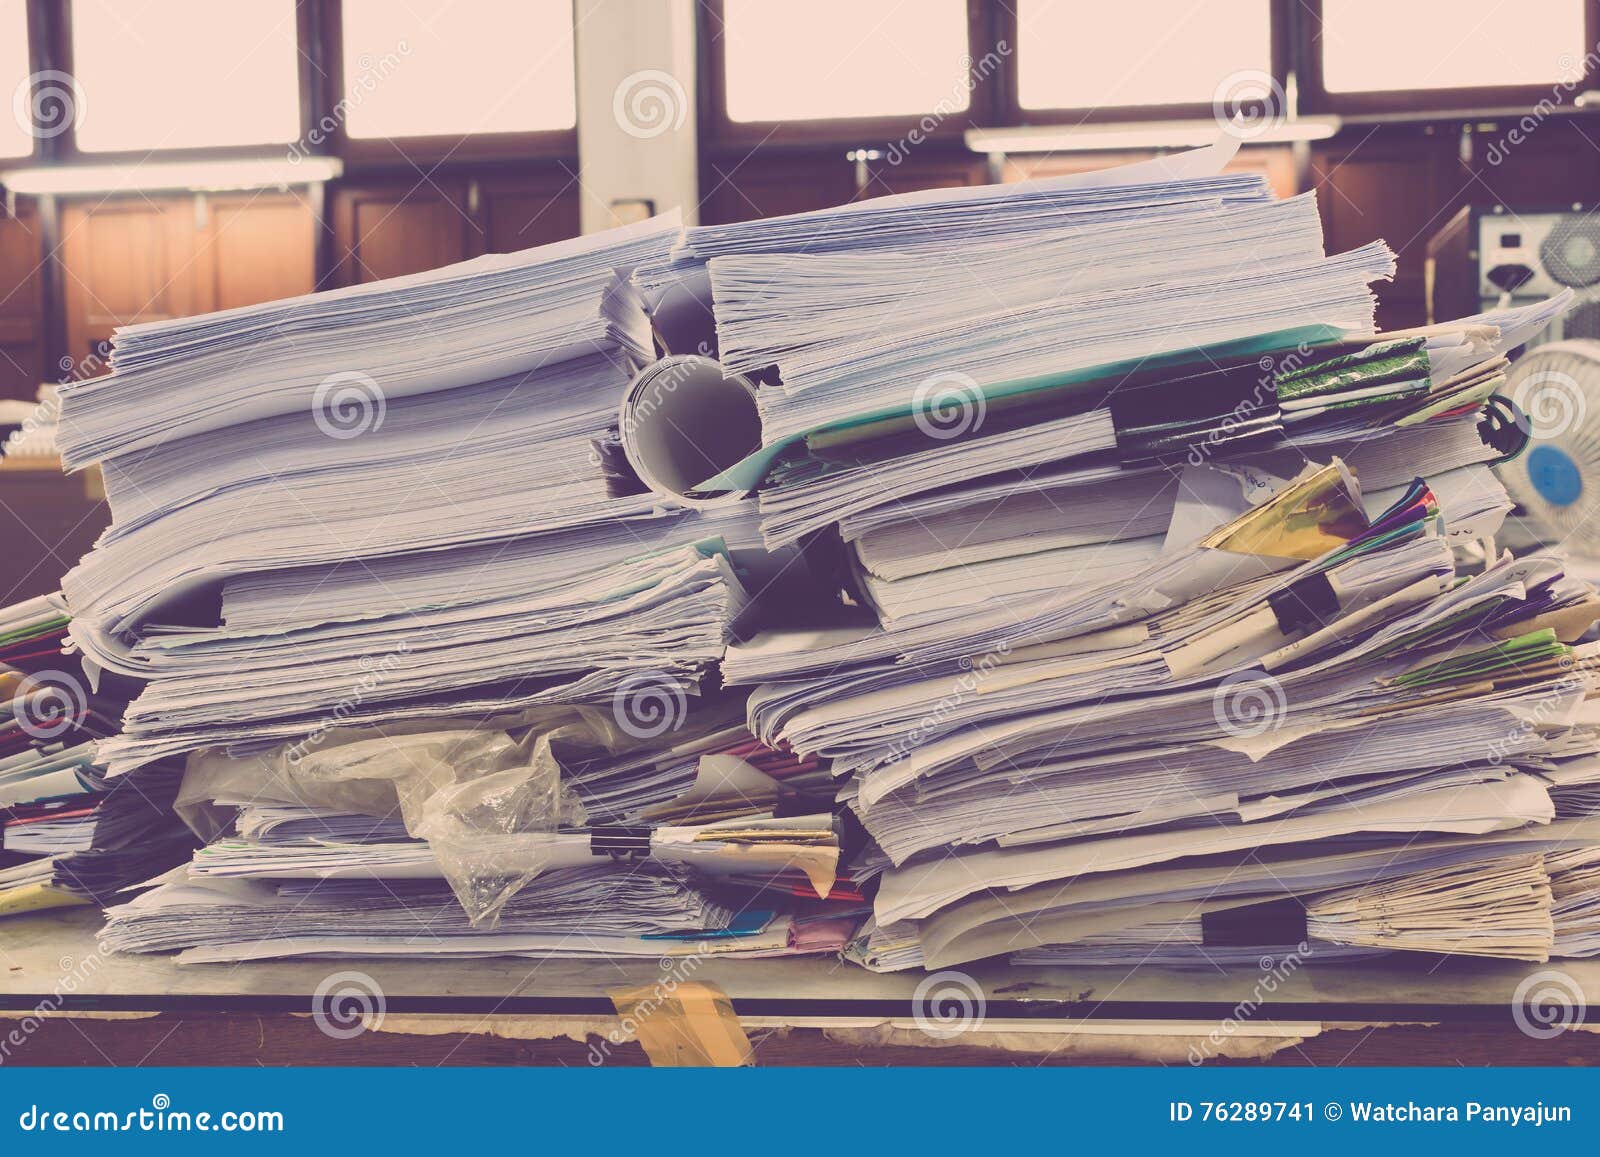 pile of papers laid overlap on the desk